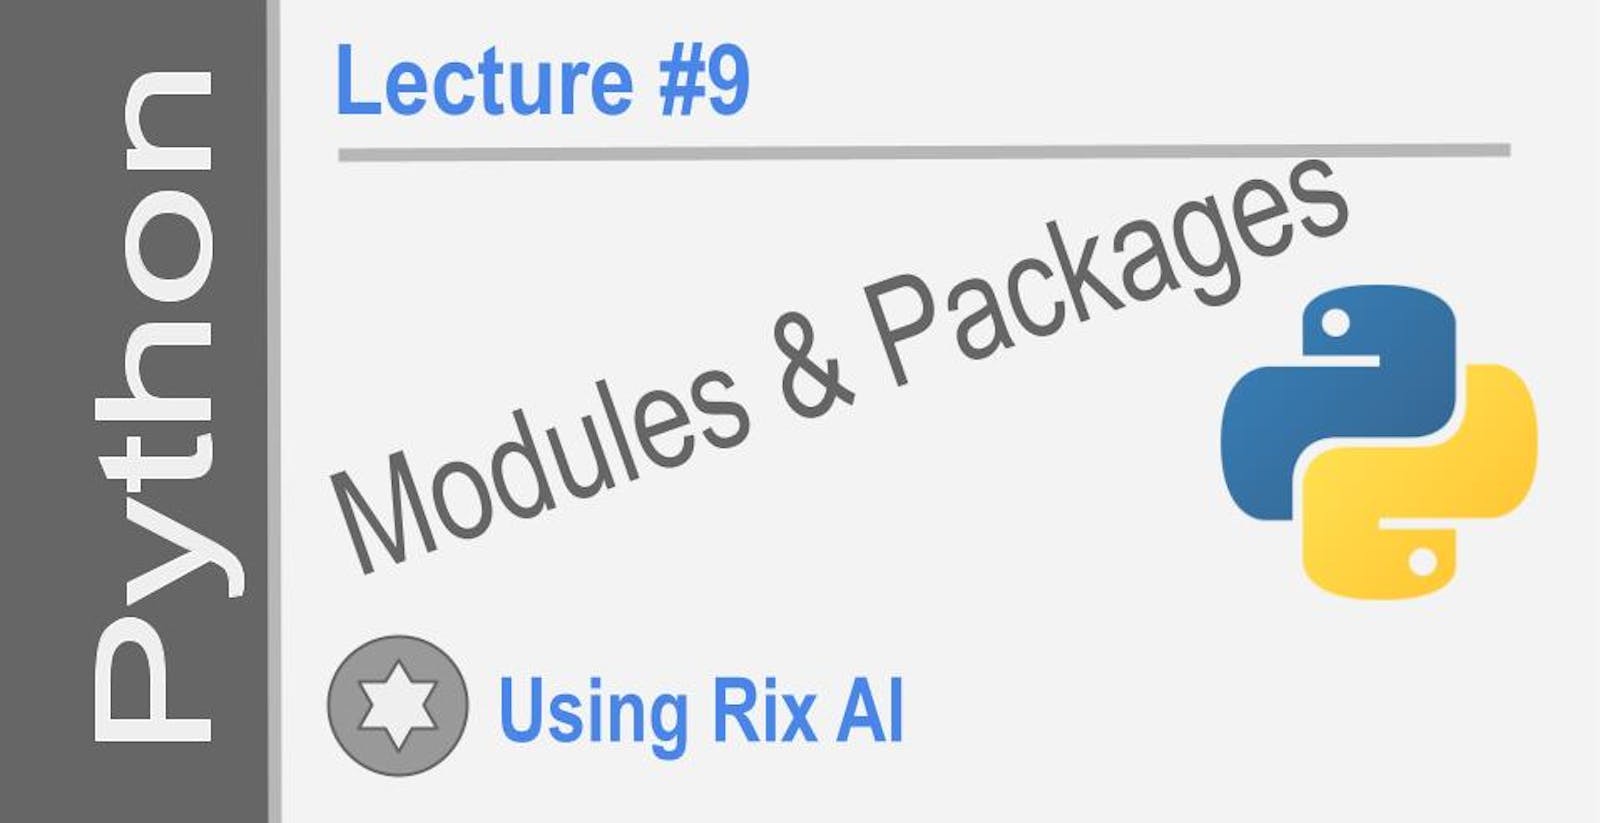 Modules & Packages